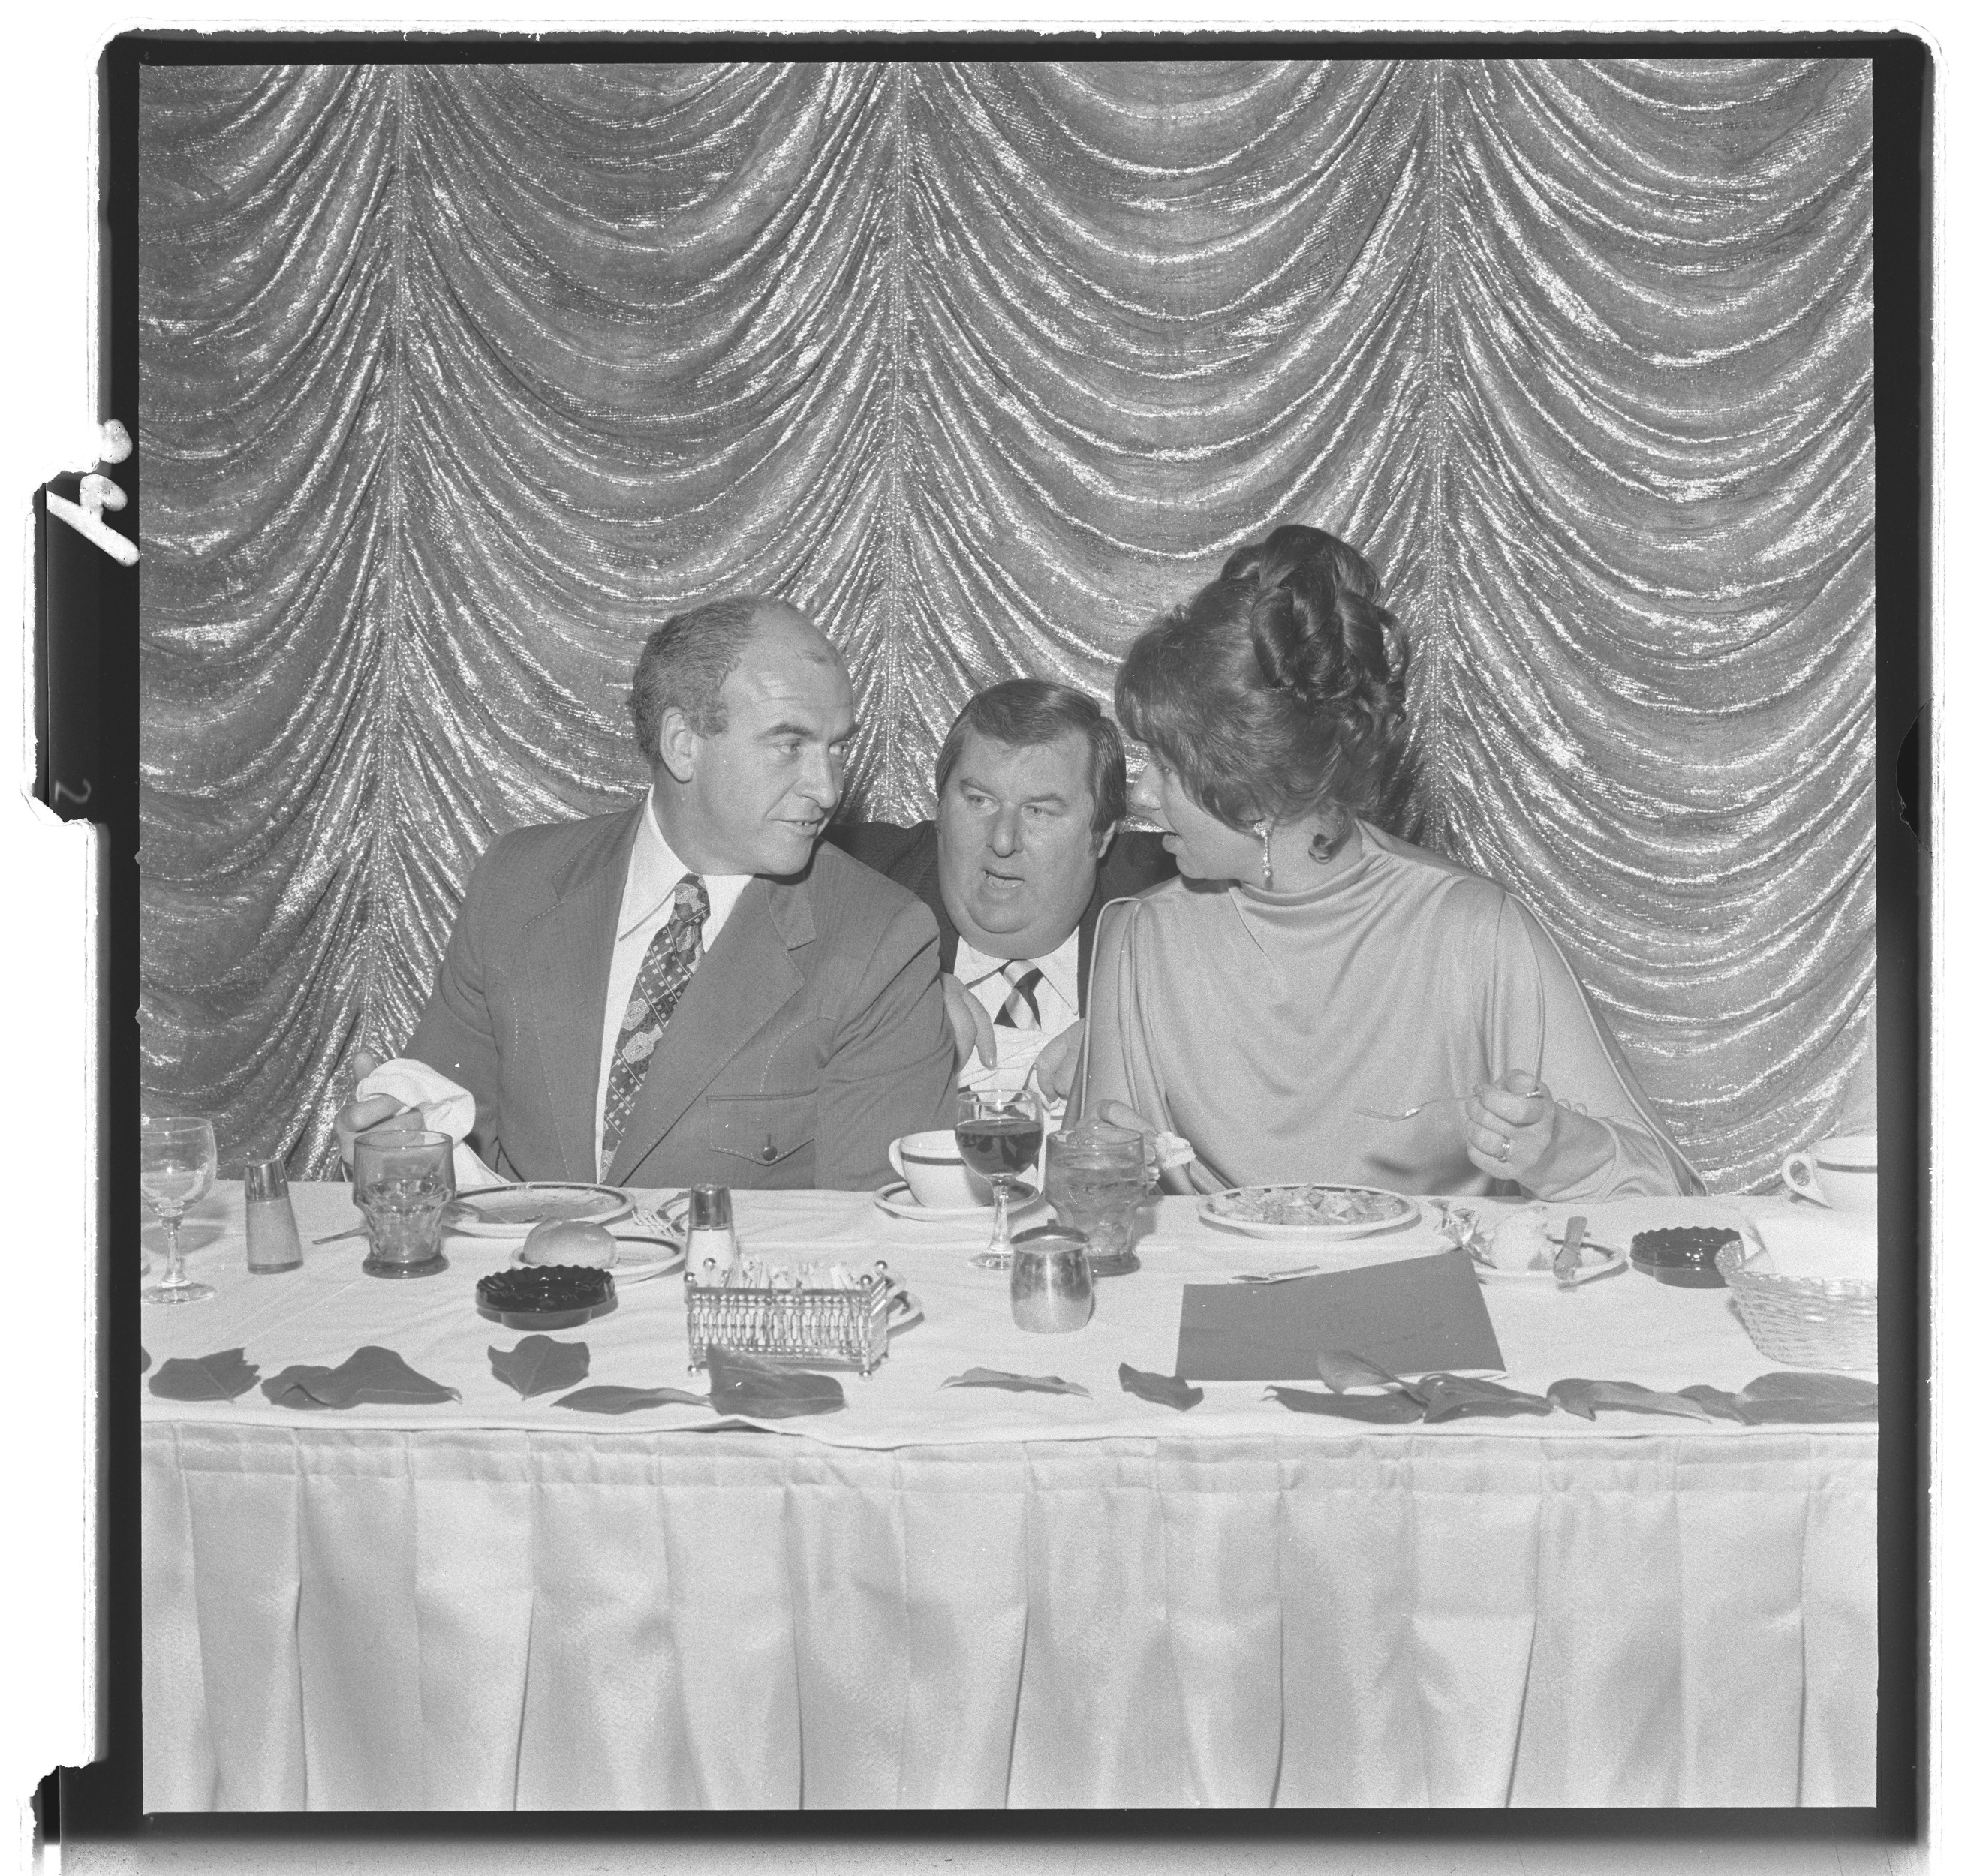 Photographs of B'nai B'rith(Man of the Year) Mike O'Callaghan - Gov. of Nevada with wife Carolyn, image 04